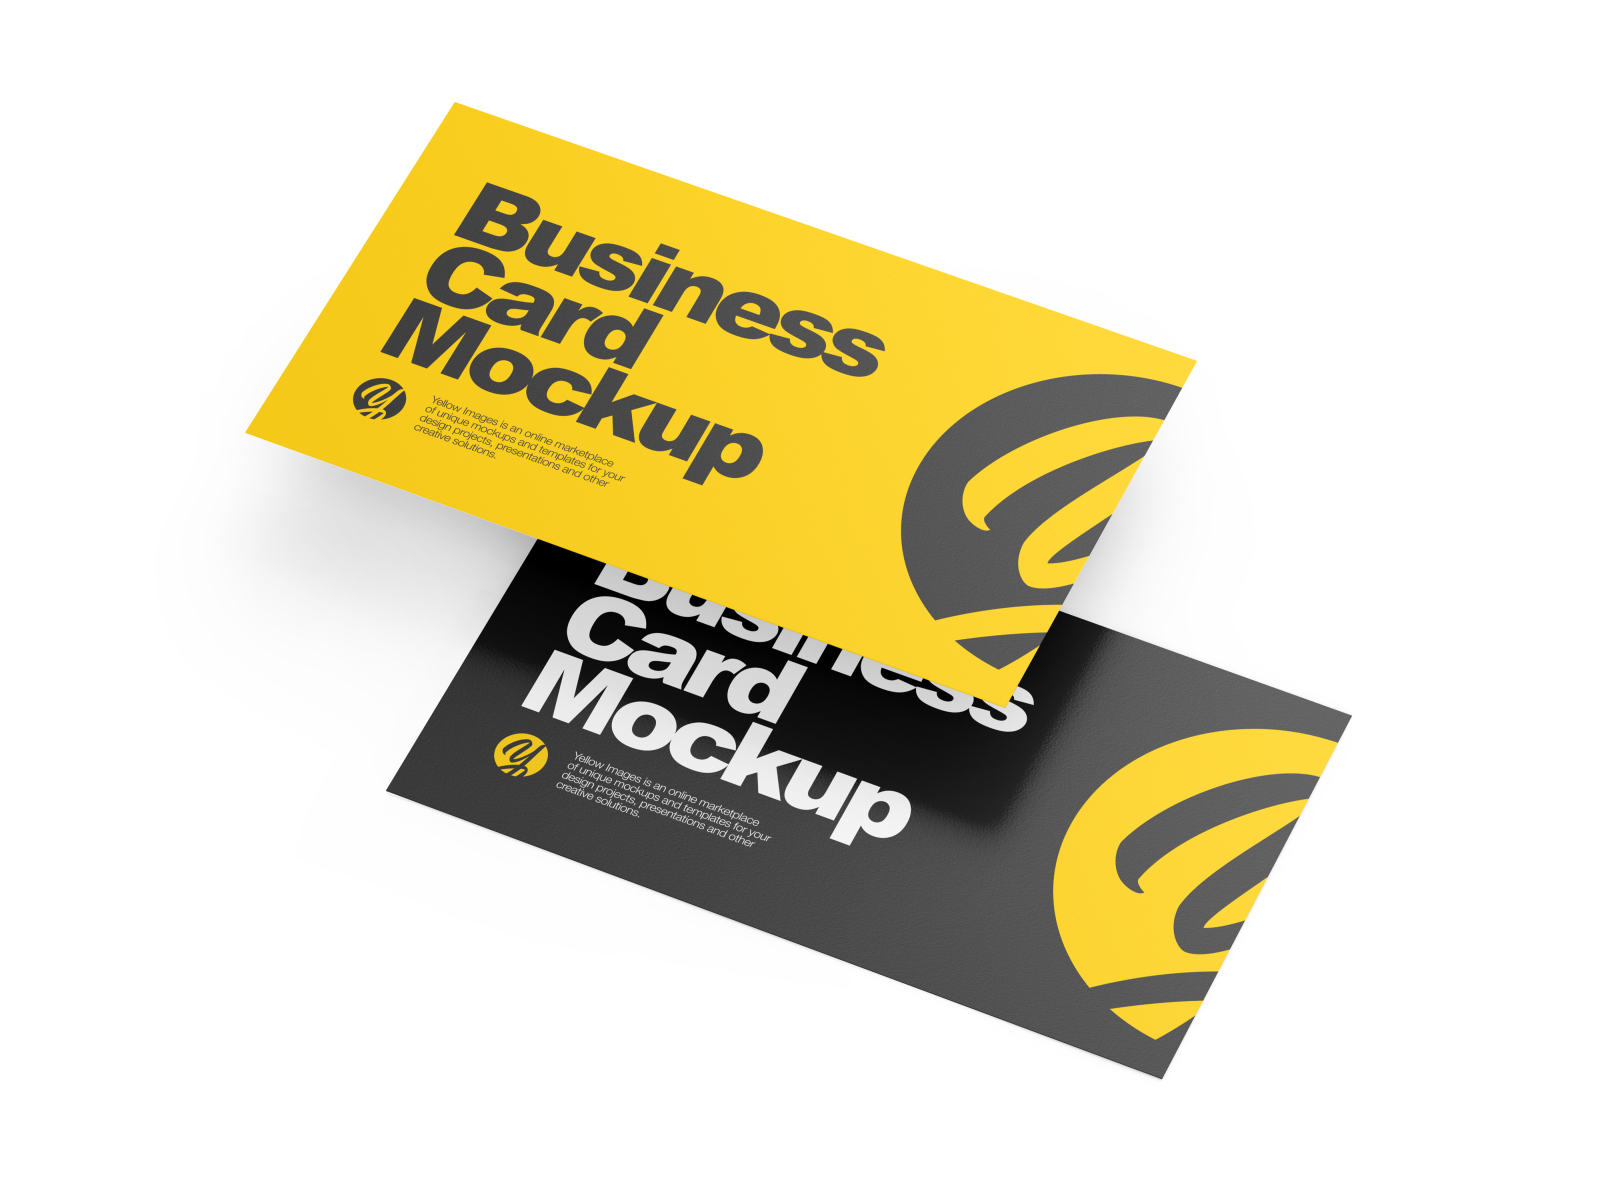 Download Two Paper Business Cards Mockup By Vadim On Dribbble PSD Mockup Templates